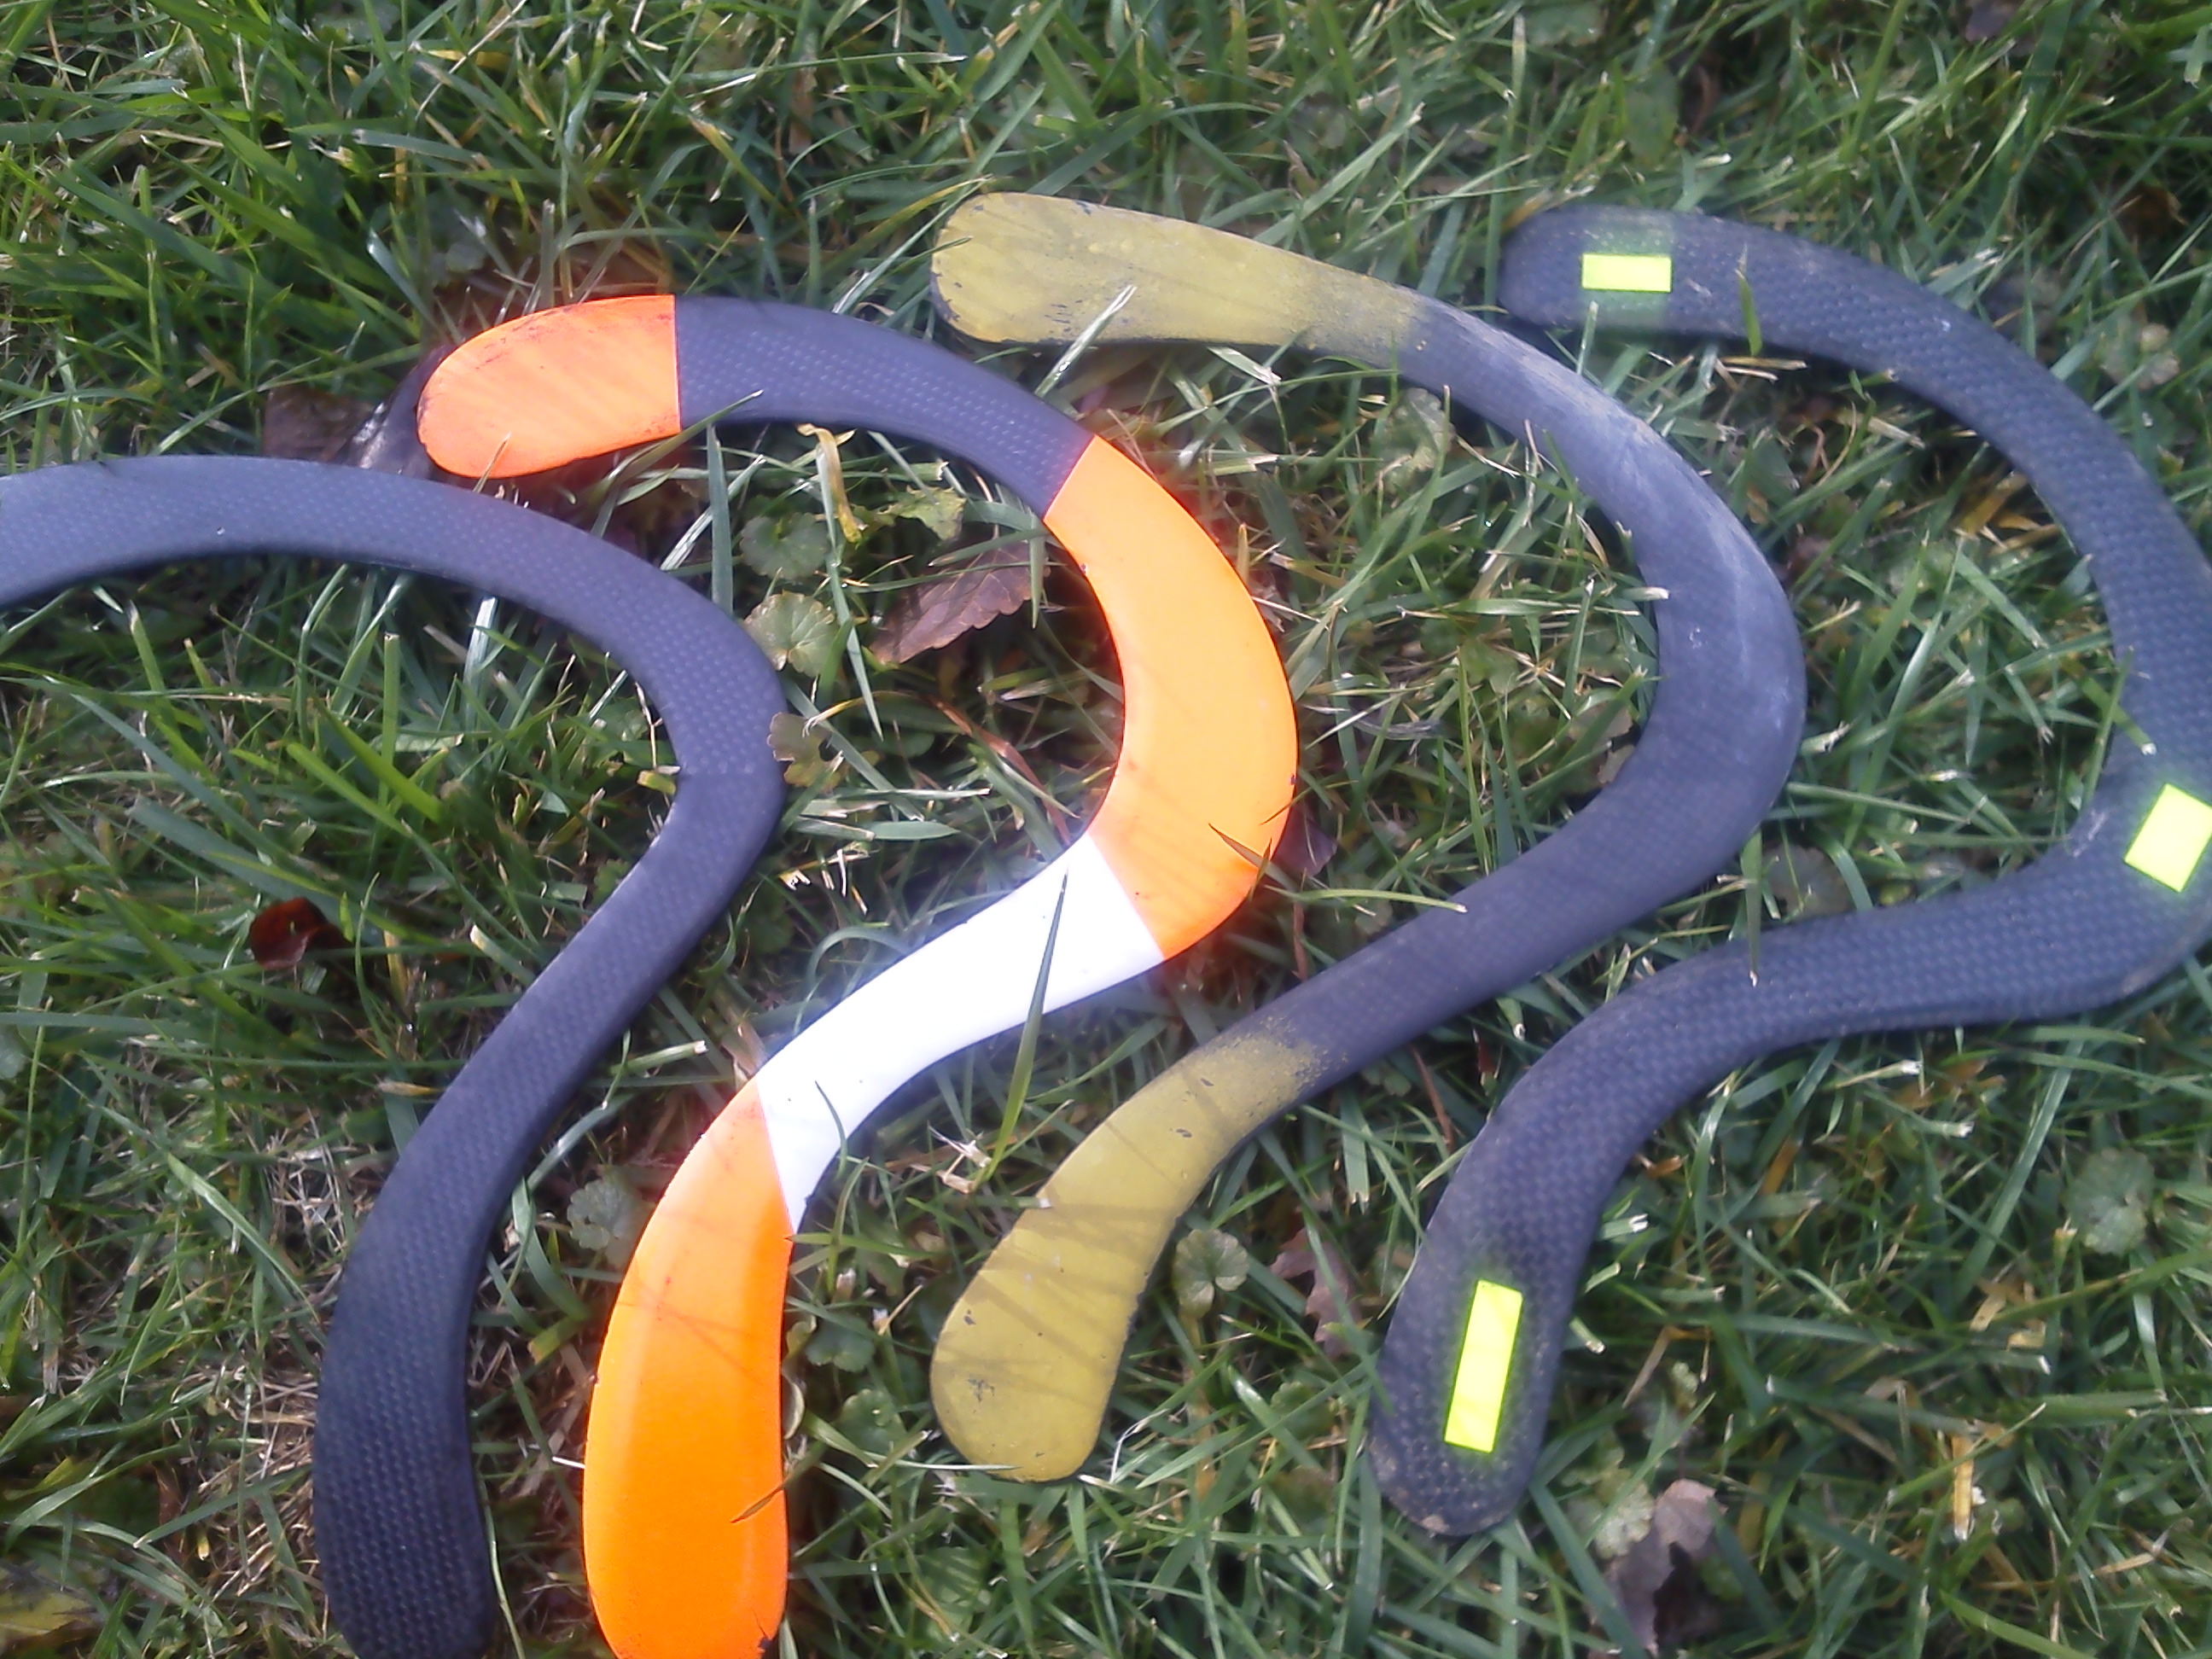 Examples of competition distance boomerangs